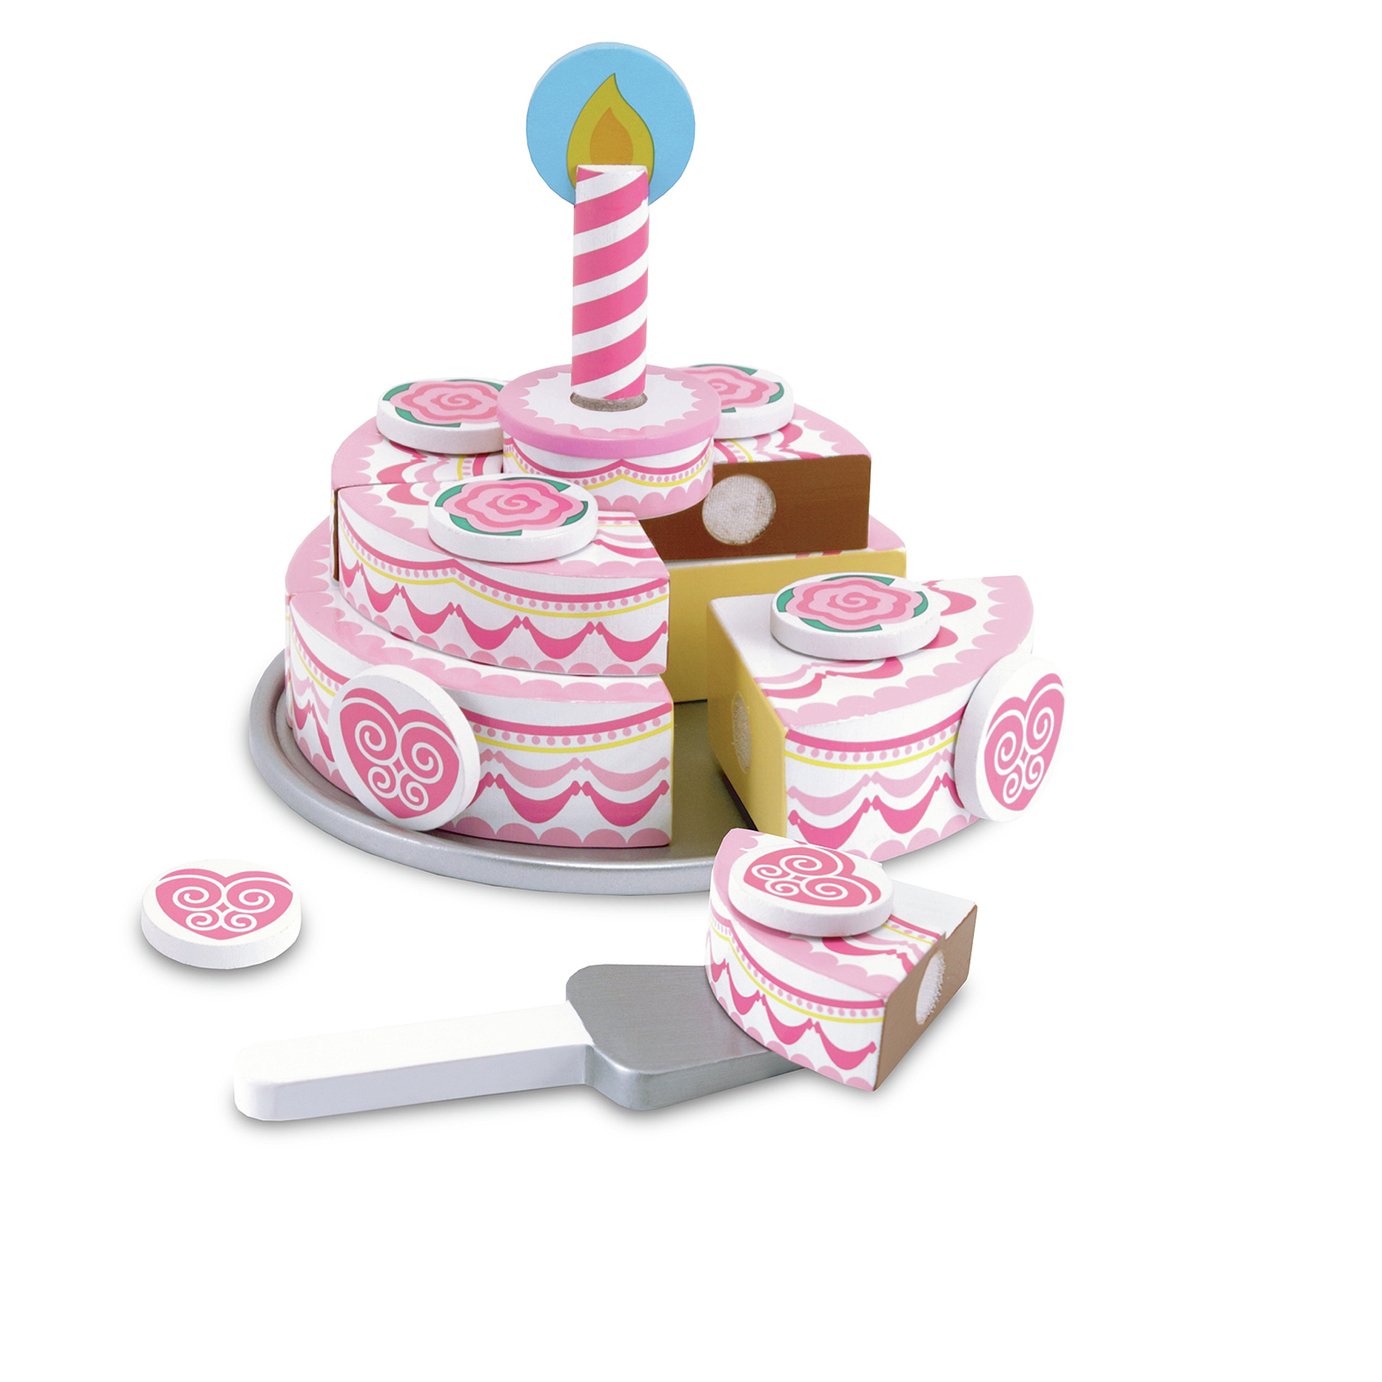 Melissa & Doug Wooden Triple Layer Party Cake Review